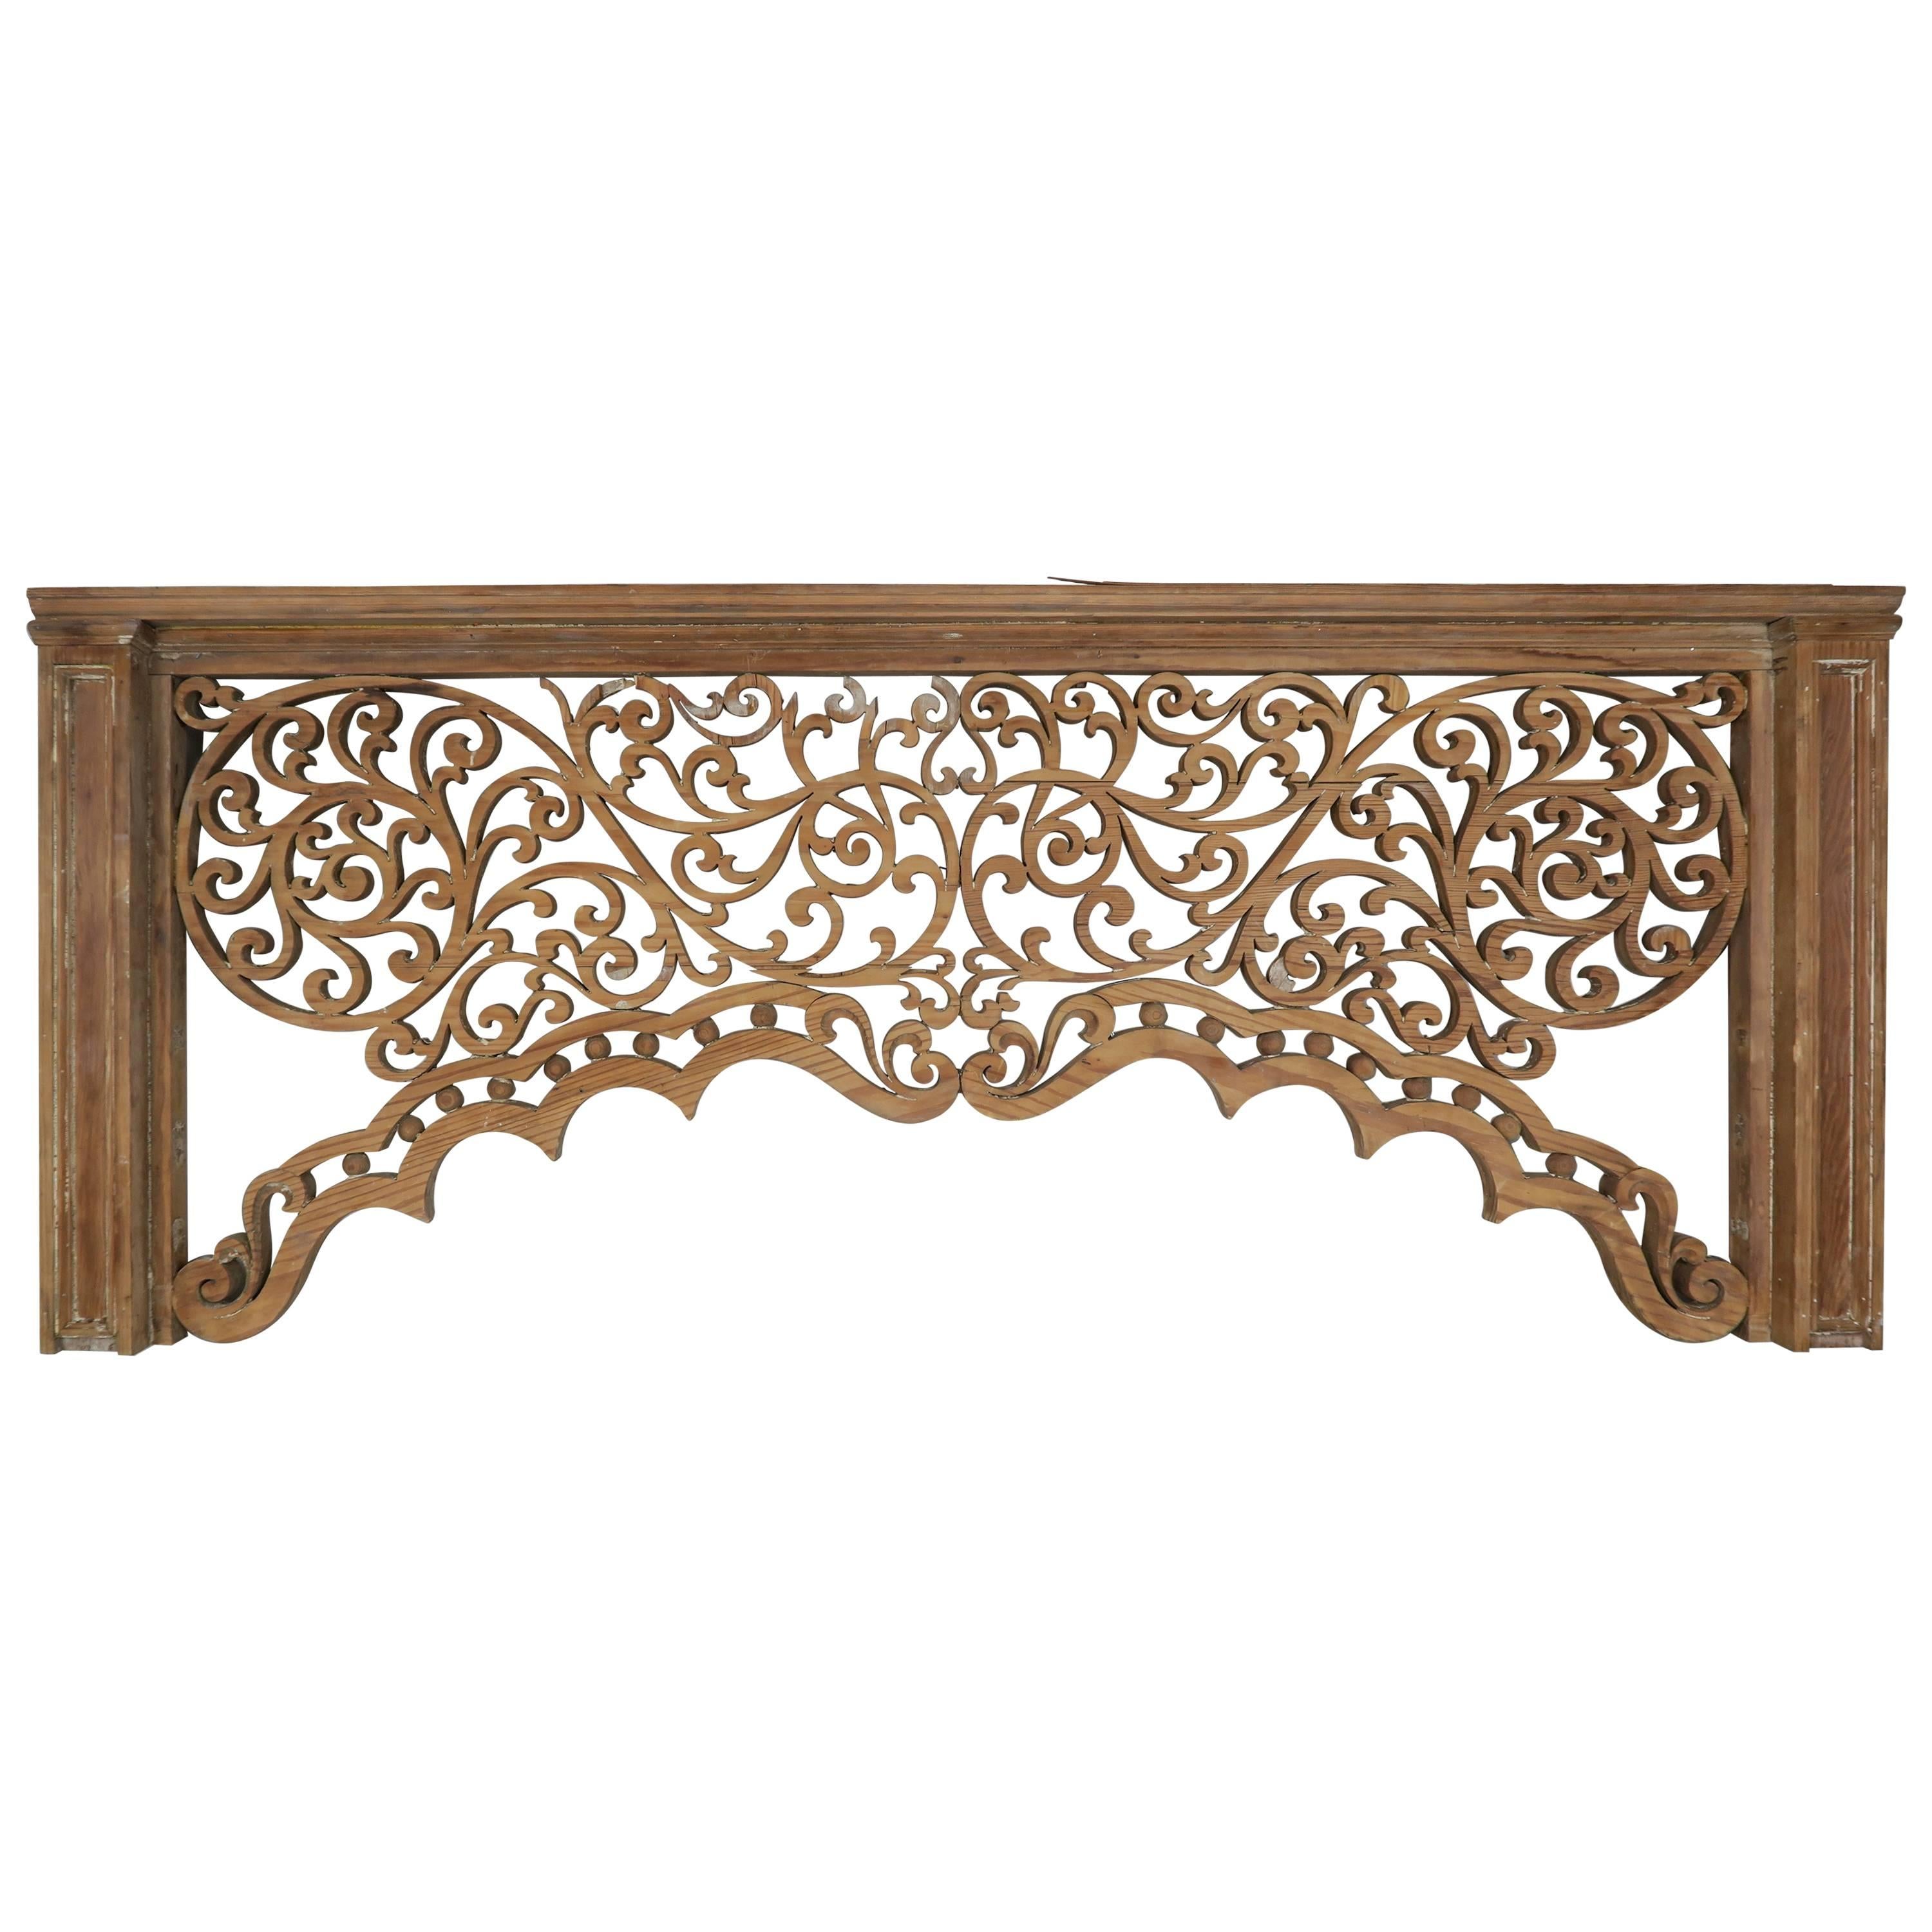 Carved Wood Scrolled Architectural Piece